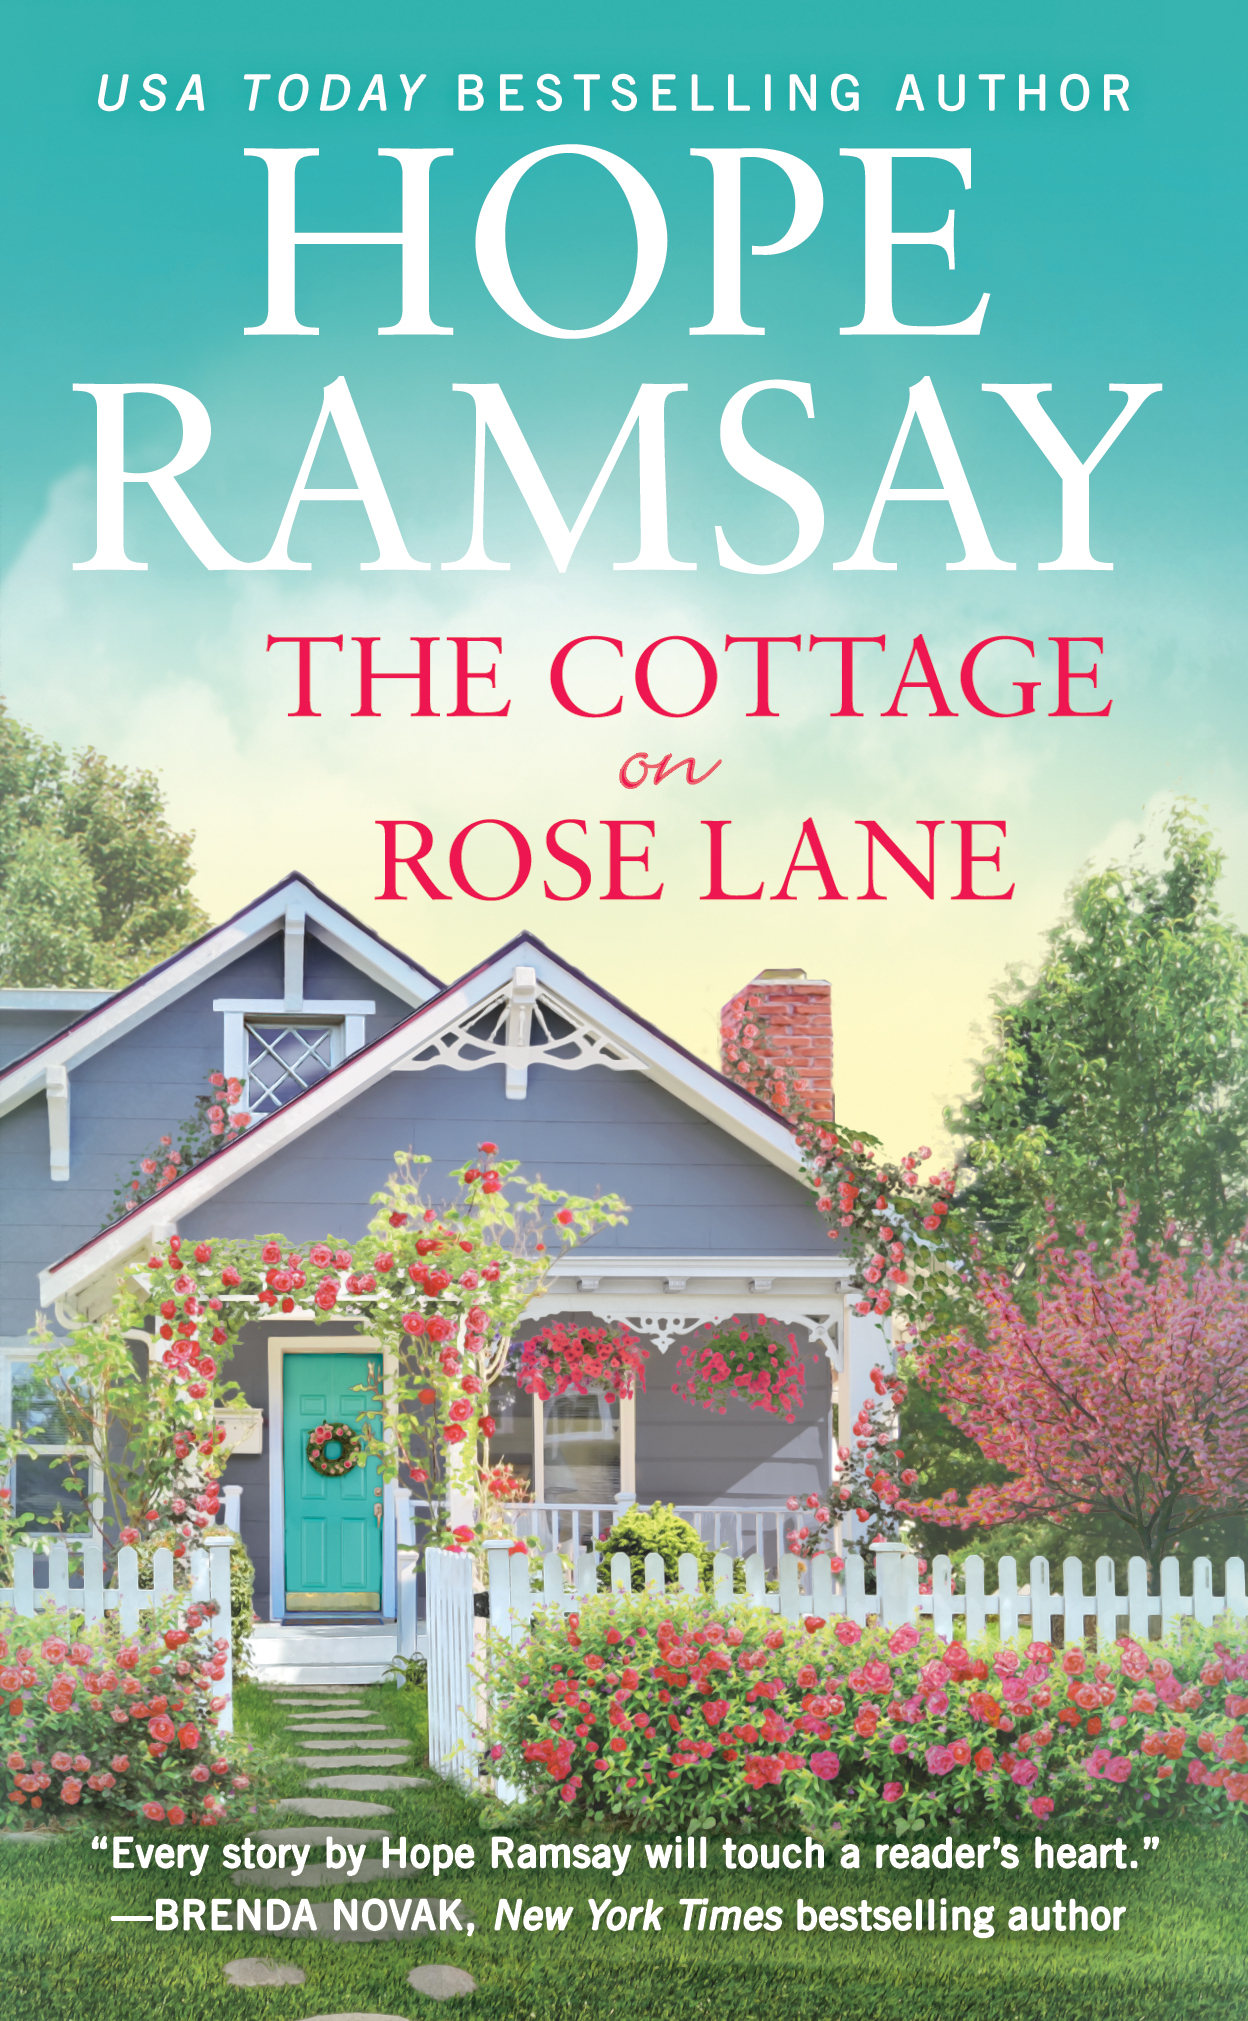 Hope Ramsay -- USA Today Bestselling Author